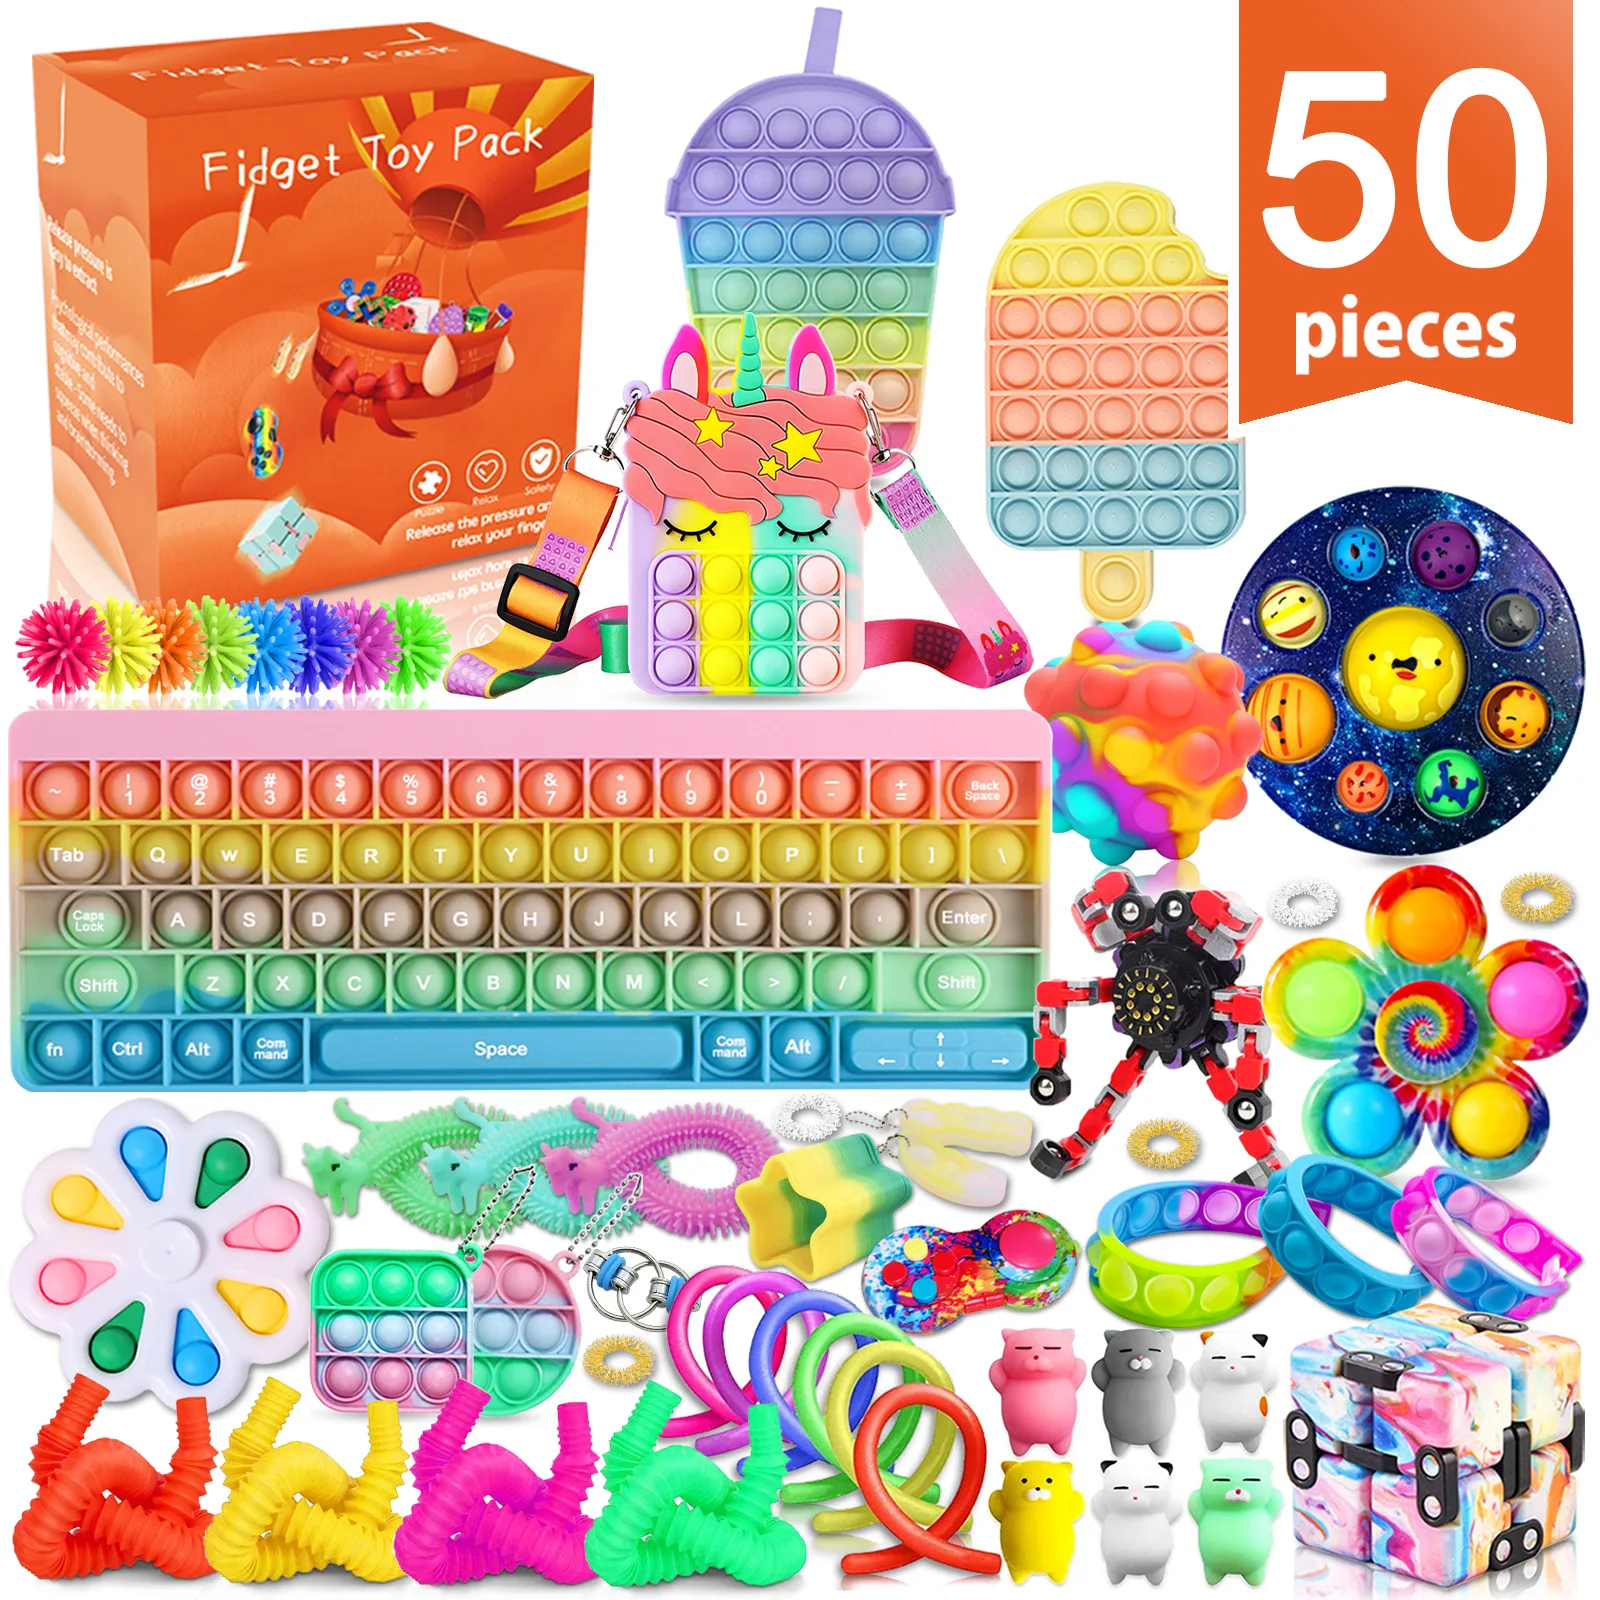 Fidget Toys Pack Set Countdown Antistress Easter Advent Calendar Makeup Anti Stress Relief Figet Toy Pack Box Kids Easter Gift